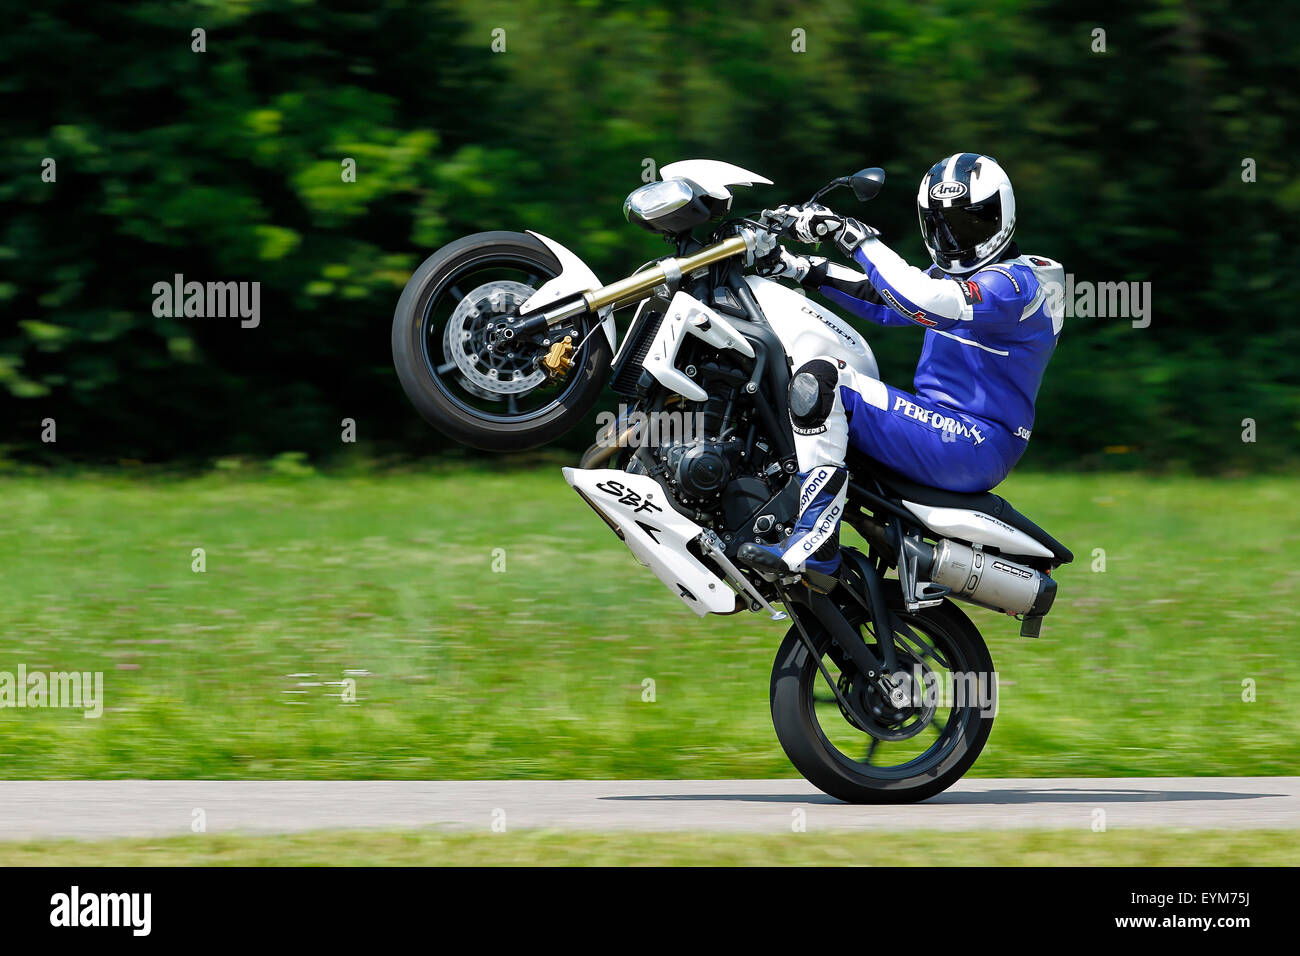 Motorcycle, three-cylinder engine, Triumph Streettriple, year of construction in 2012, Wheelie on country road, Stock Photo